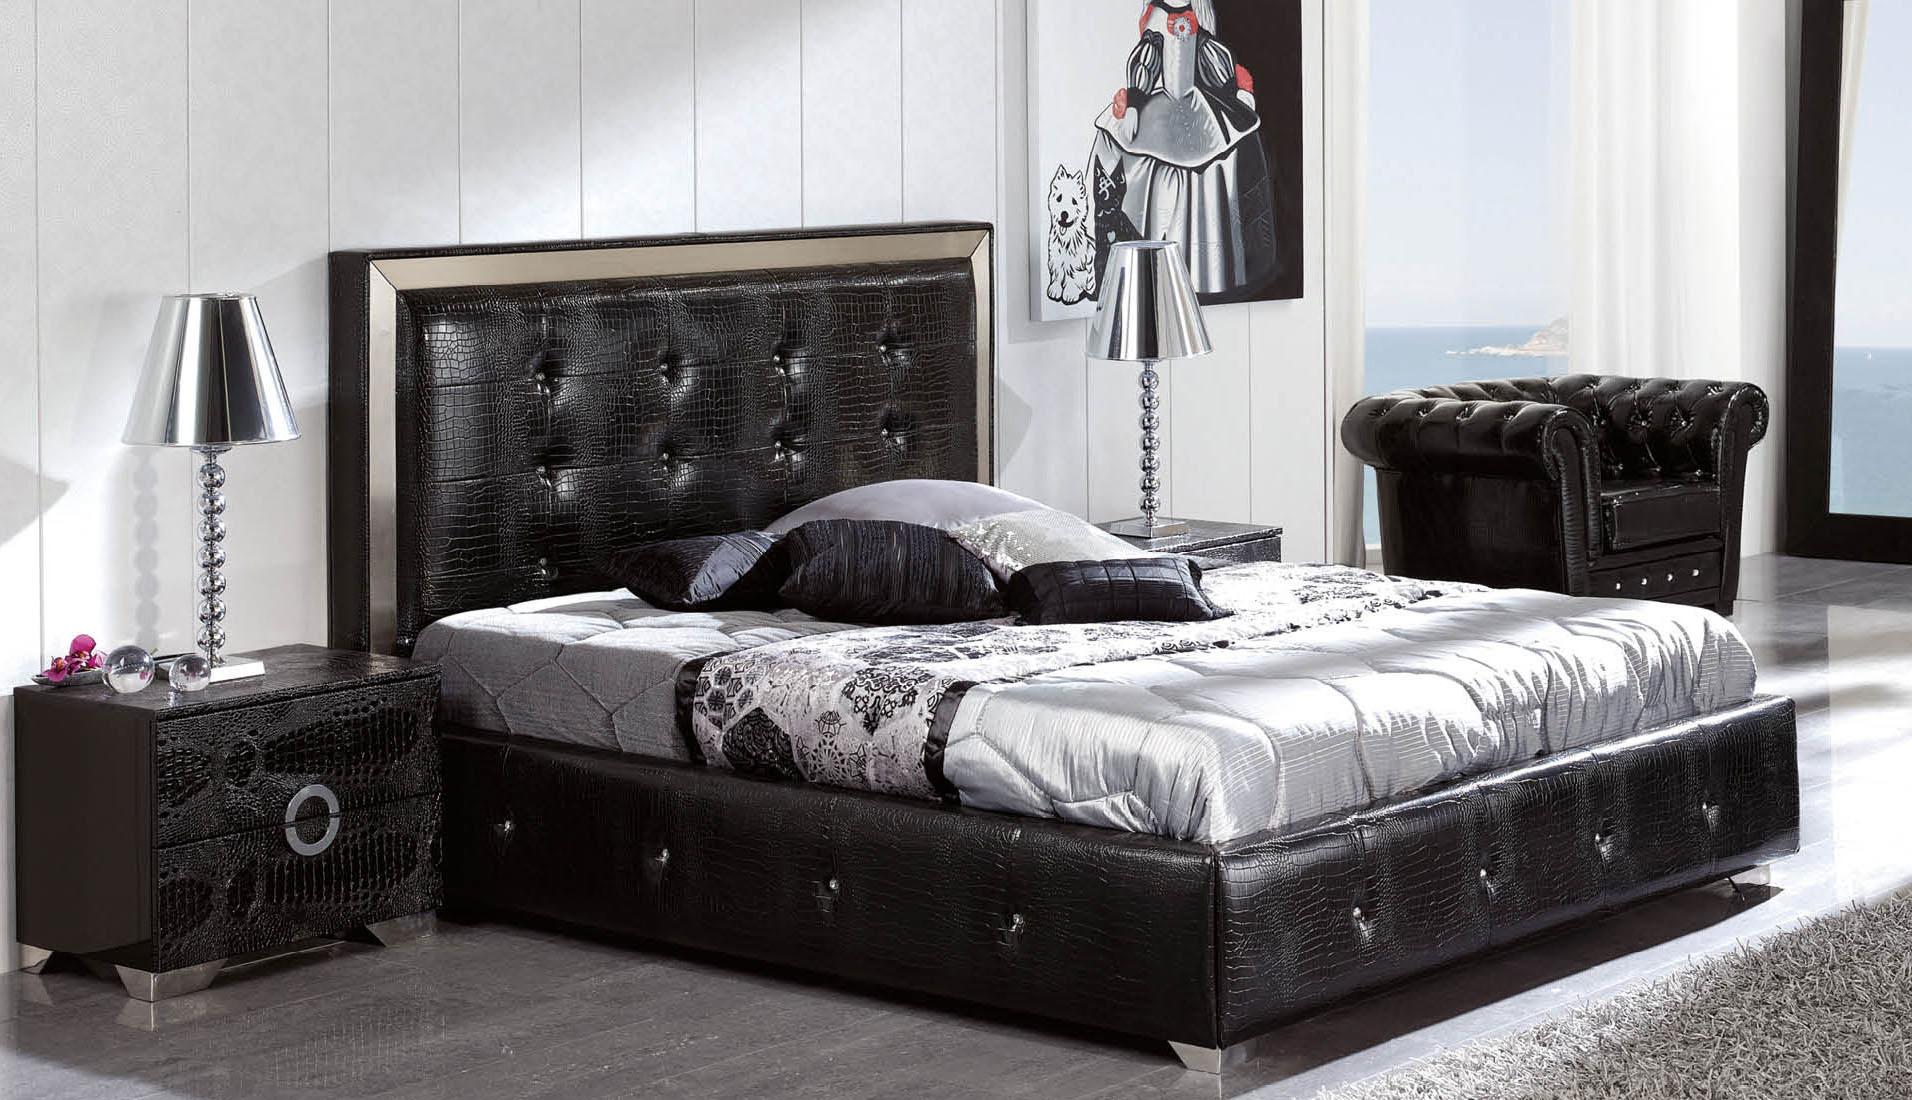 

    
ESF Coco Contemporary Luxury Black Leather Lacquer Queen Size Bedroom Set 3Pcs
